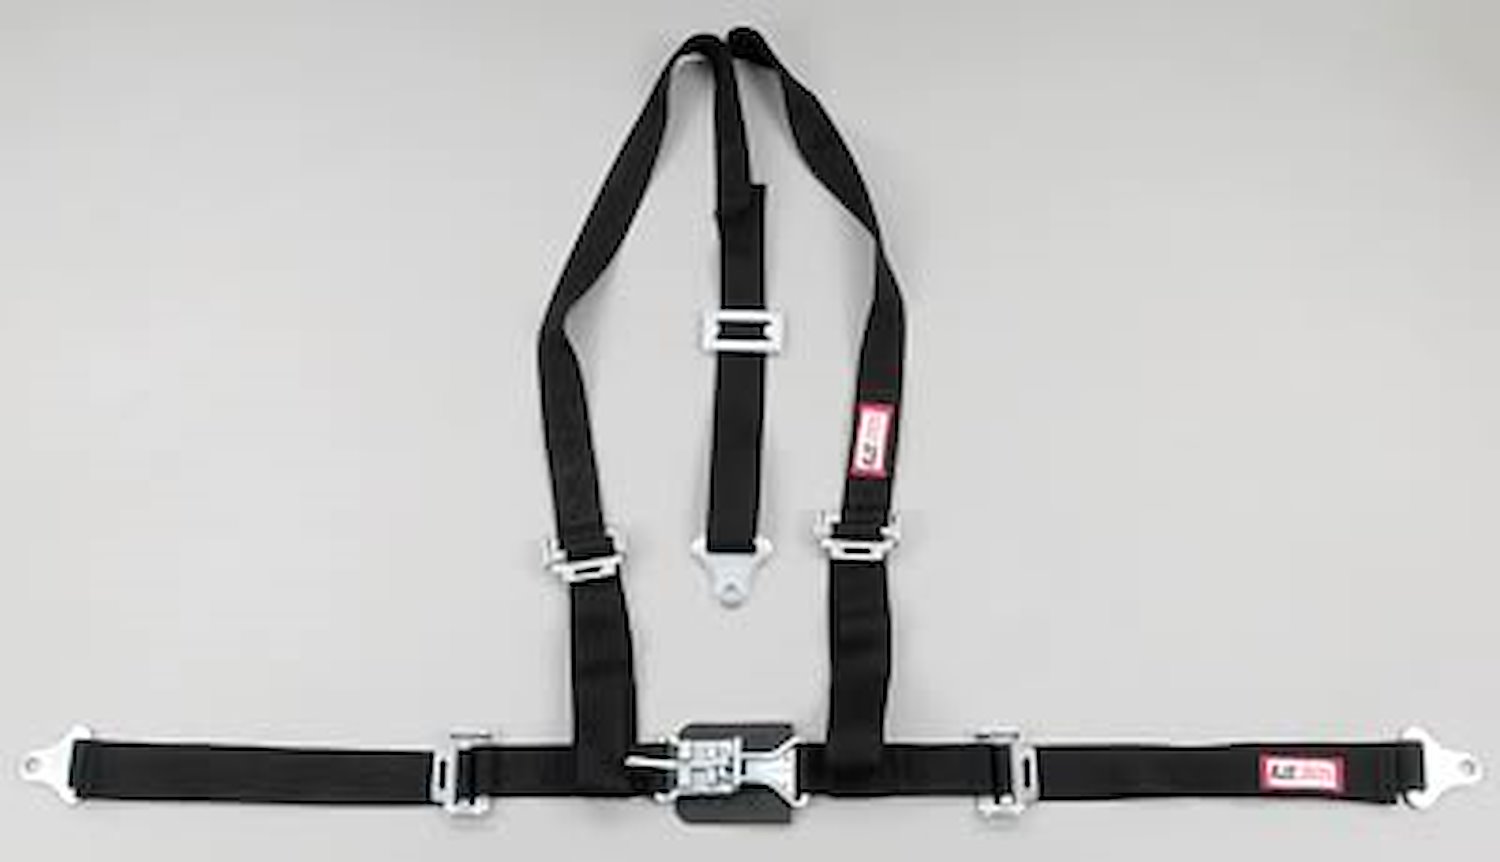 NON-SFI L&L HARNESS 3 PULL DOWN Lap Belt w/adjuster 2 S.H. Individual FLOOR Mount w/STERNUM STRAP ALL WRAP ENDS BLUE